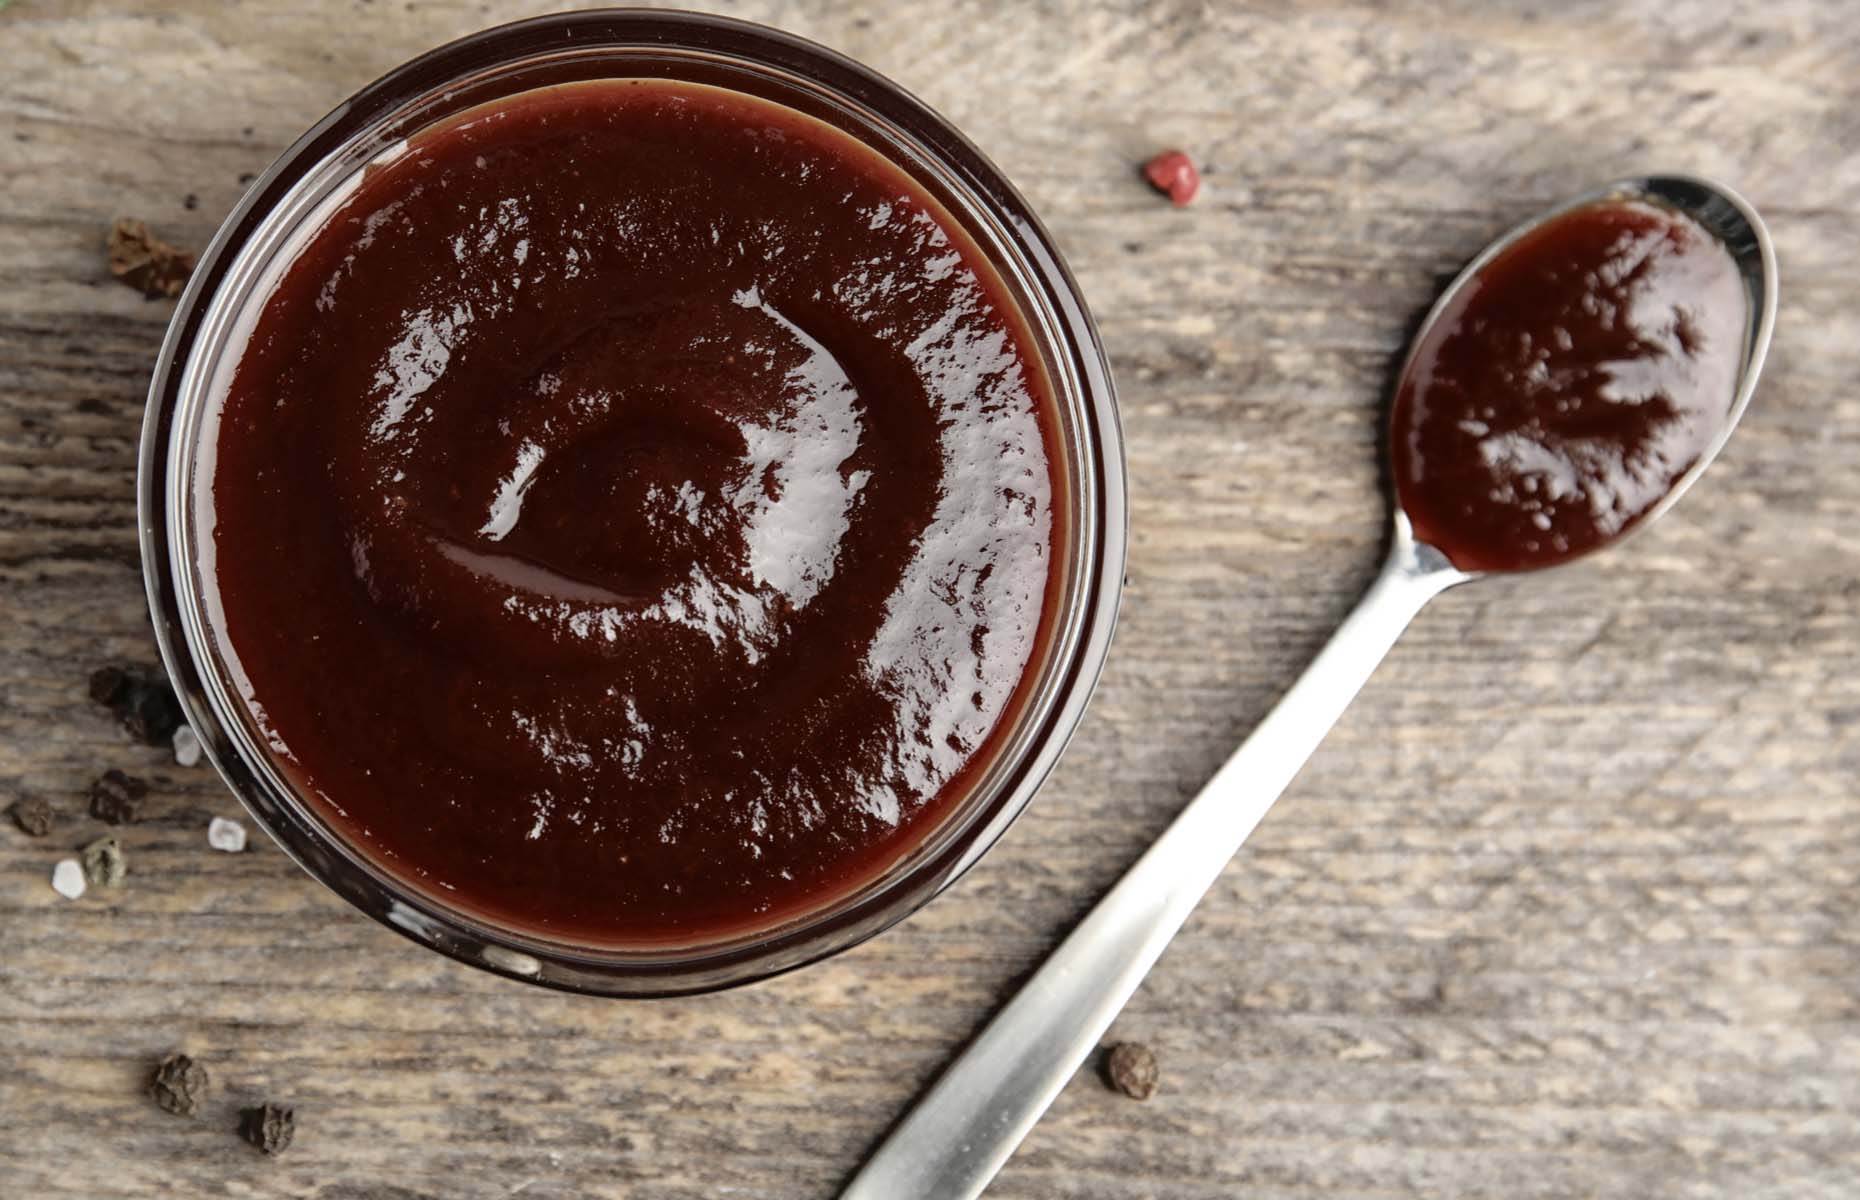 Brown sauce in a dish (Image: New Africa/Shutterstock)